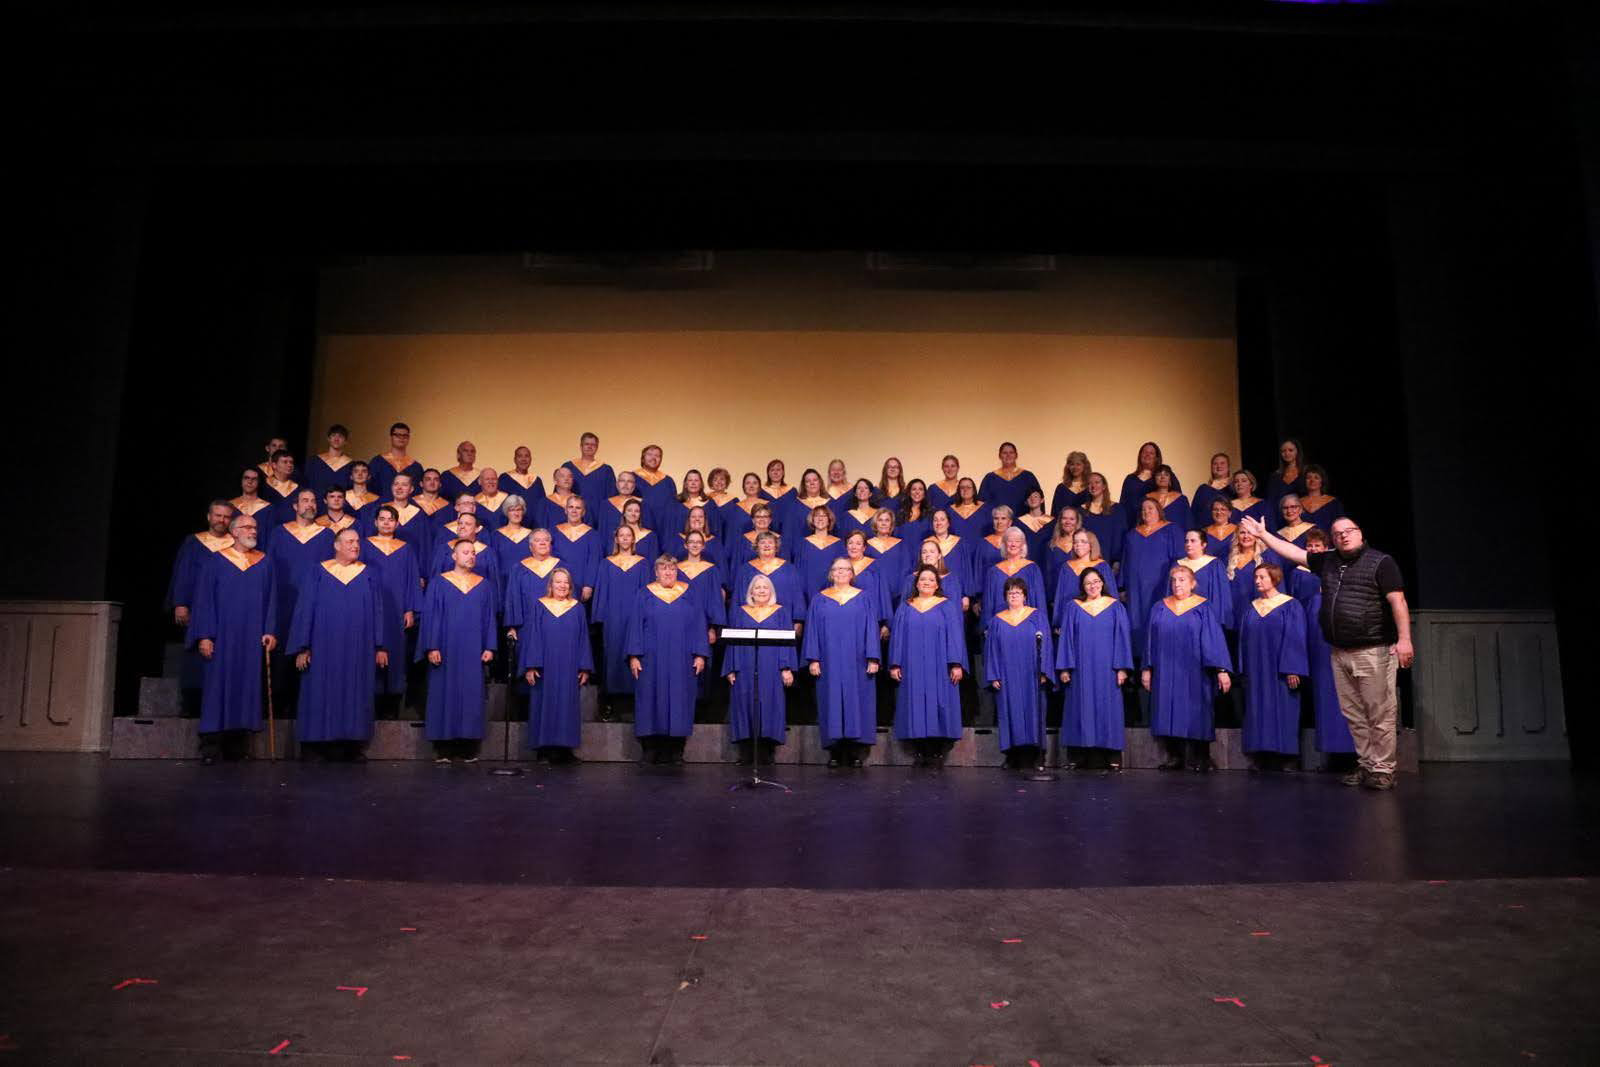 Adults dressed in blue choir robes and gold stoles on stage with director.